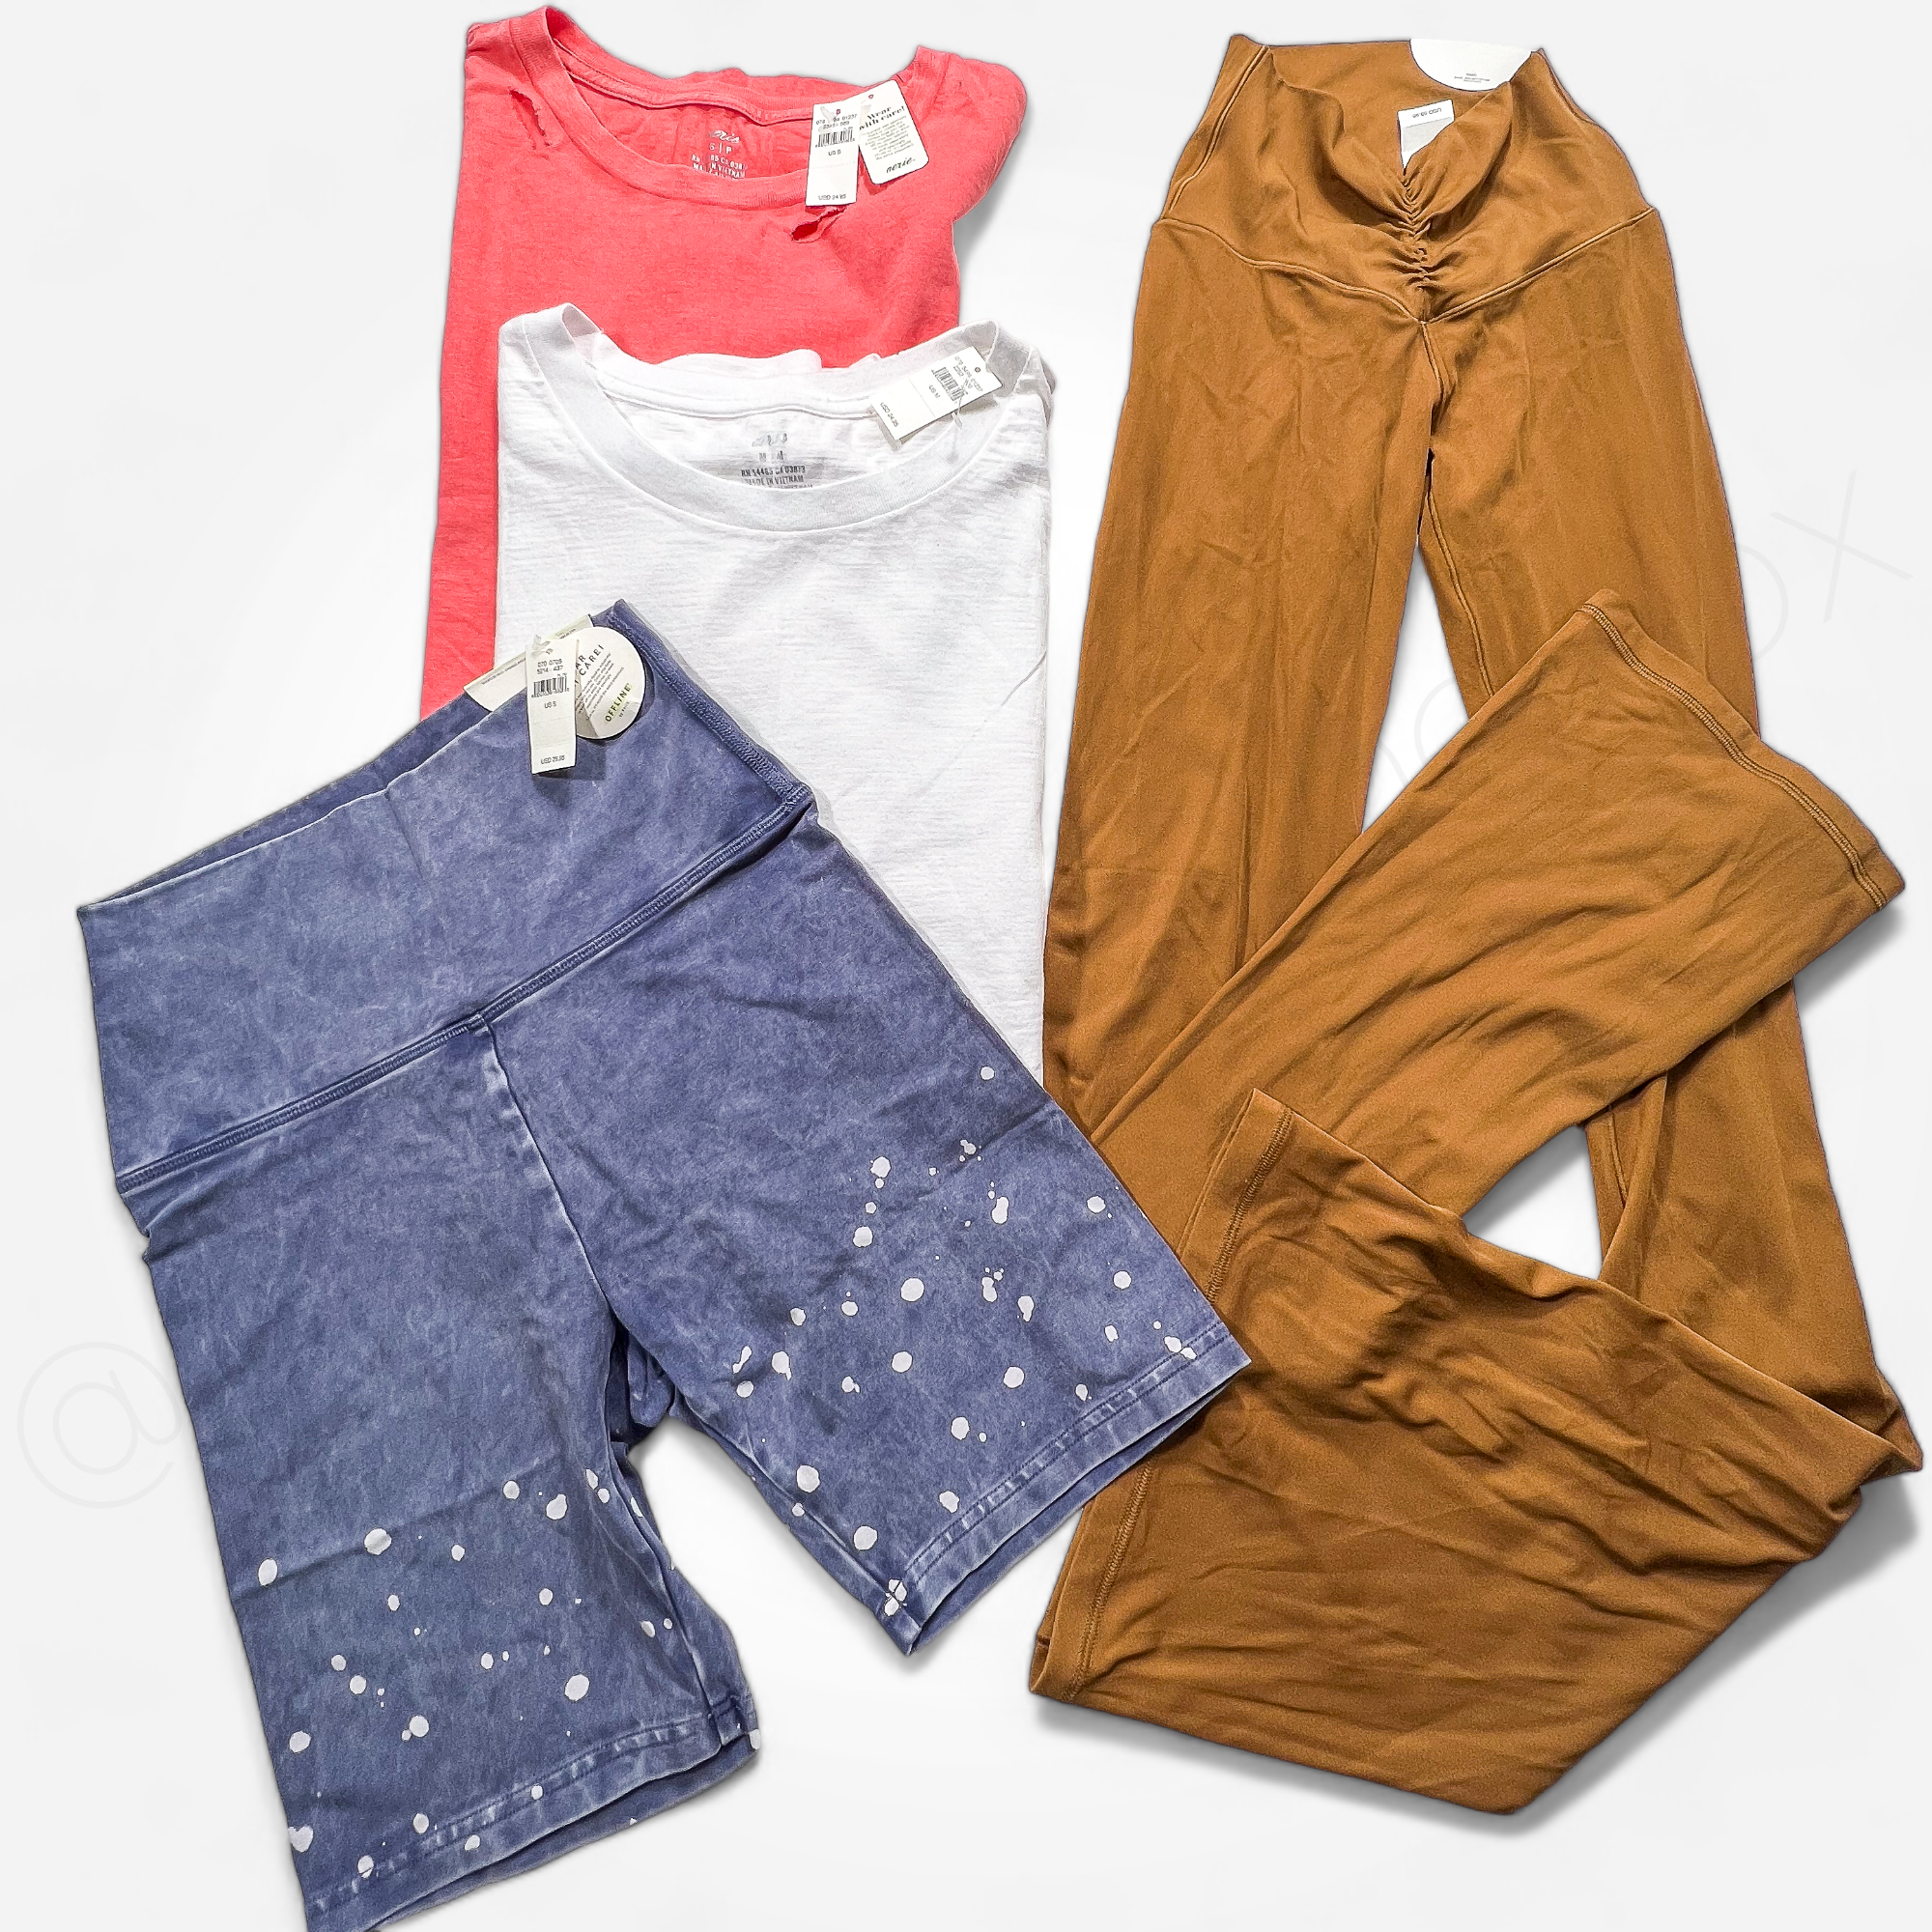 Aerie + American Eagle Assorted Women's New Wholesale Clothing